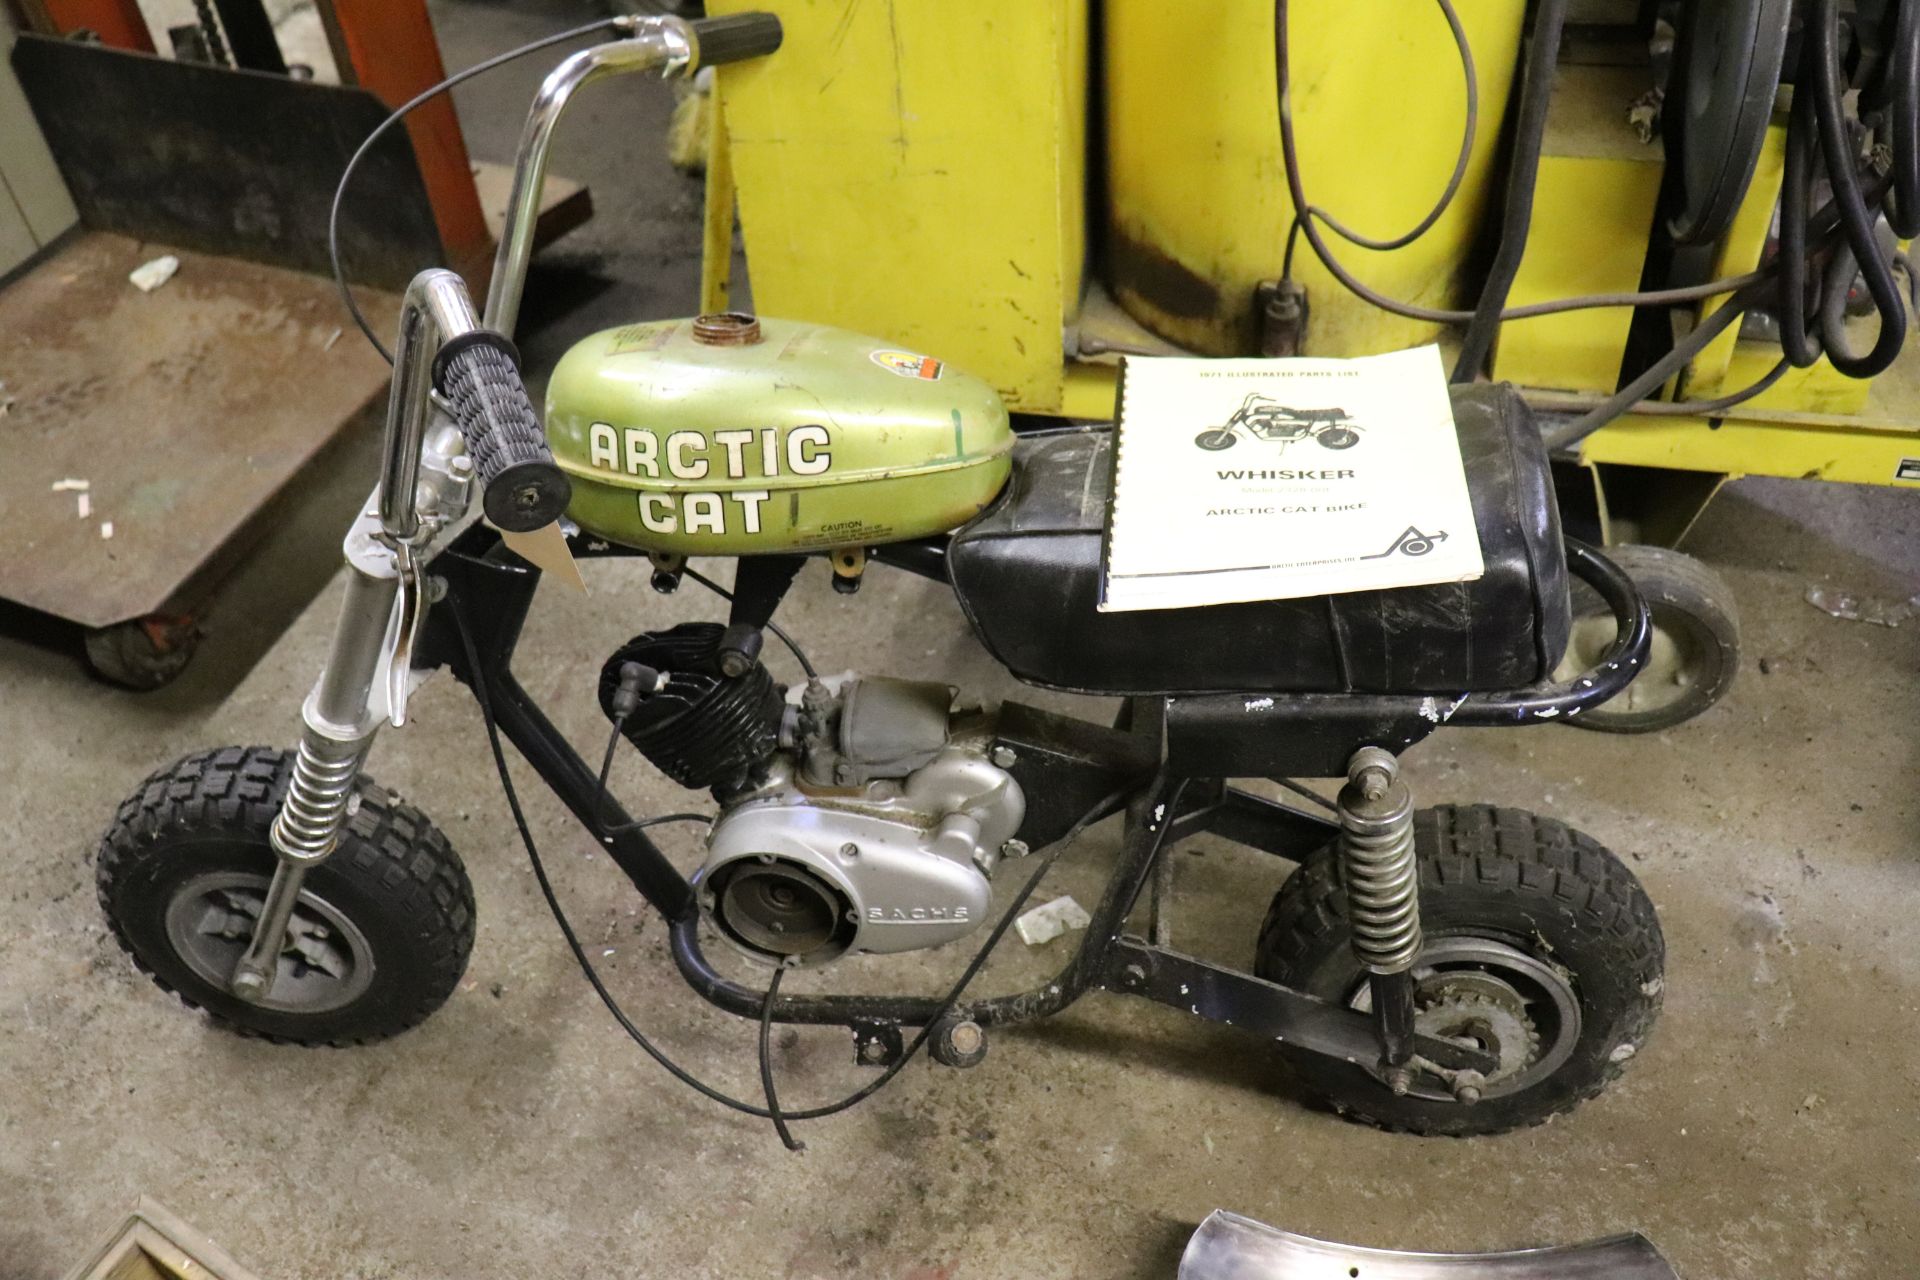 1971 Arctic Cat Whisker, model 2328-001 MINI BIKES MARKED AS PARTS BIKES, NOT OPERATIONAL, CONDITION